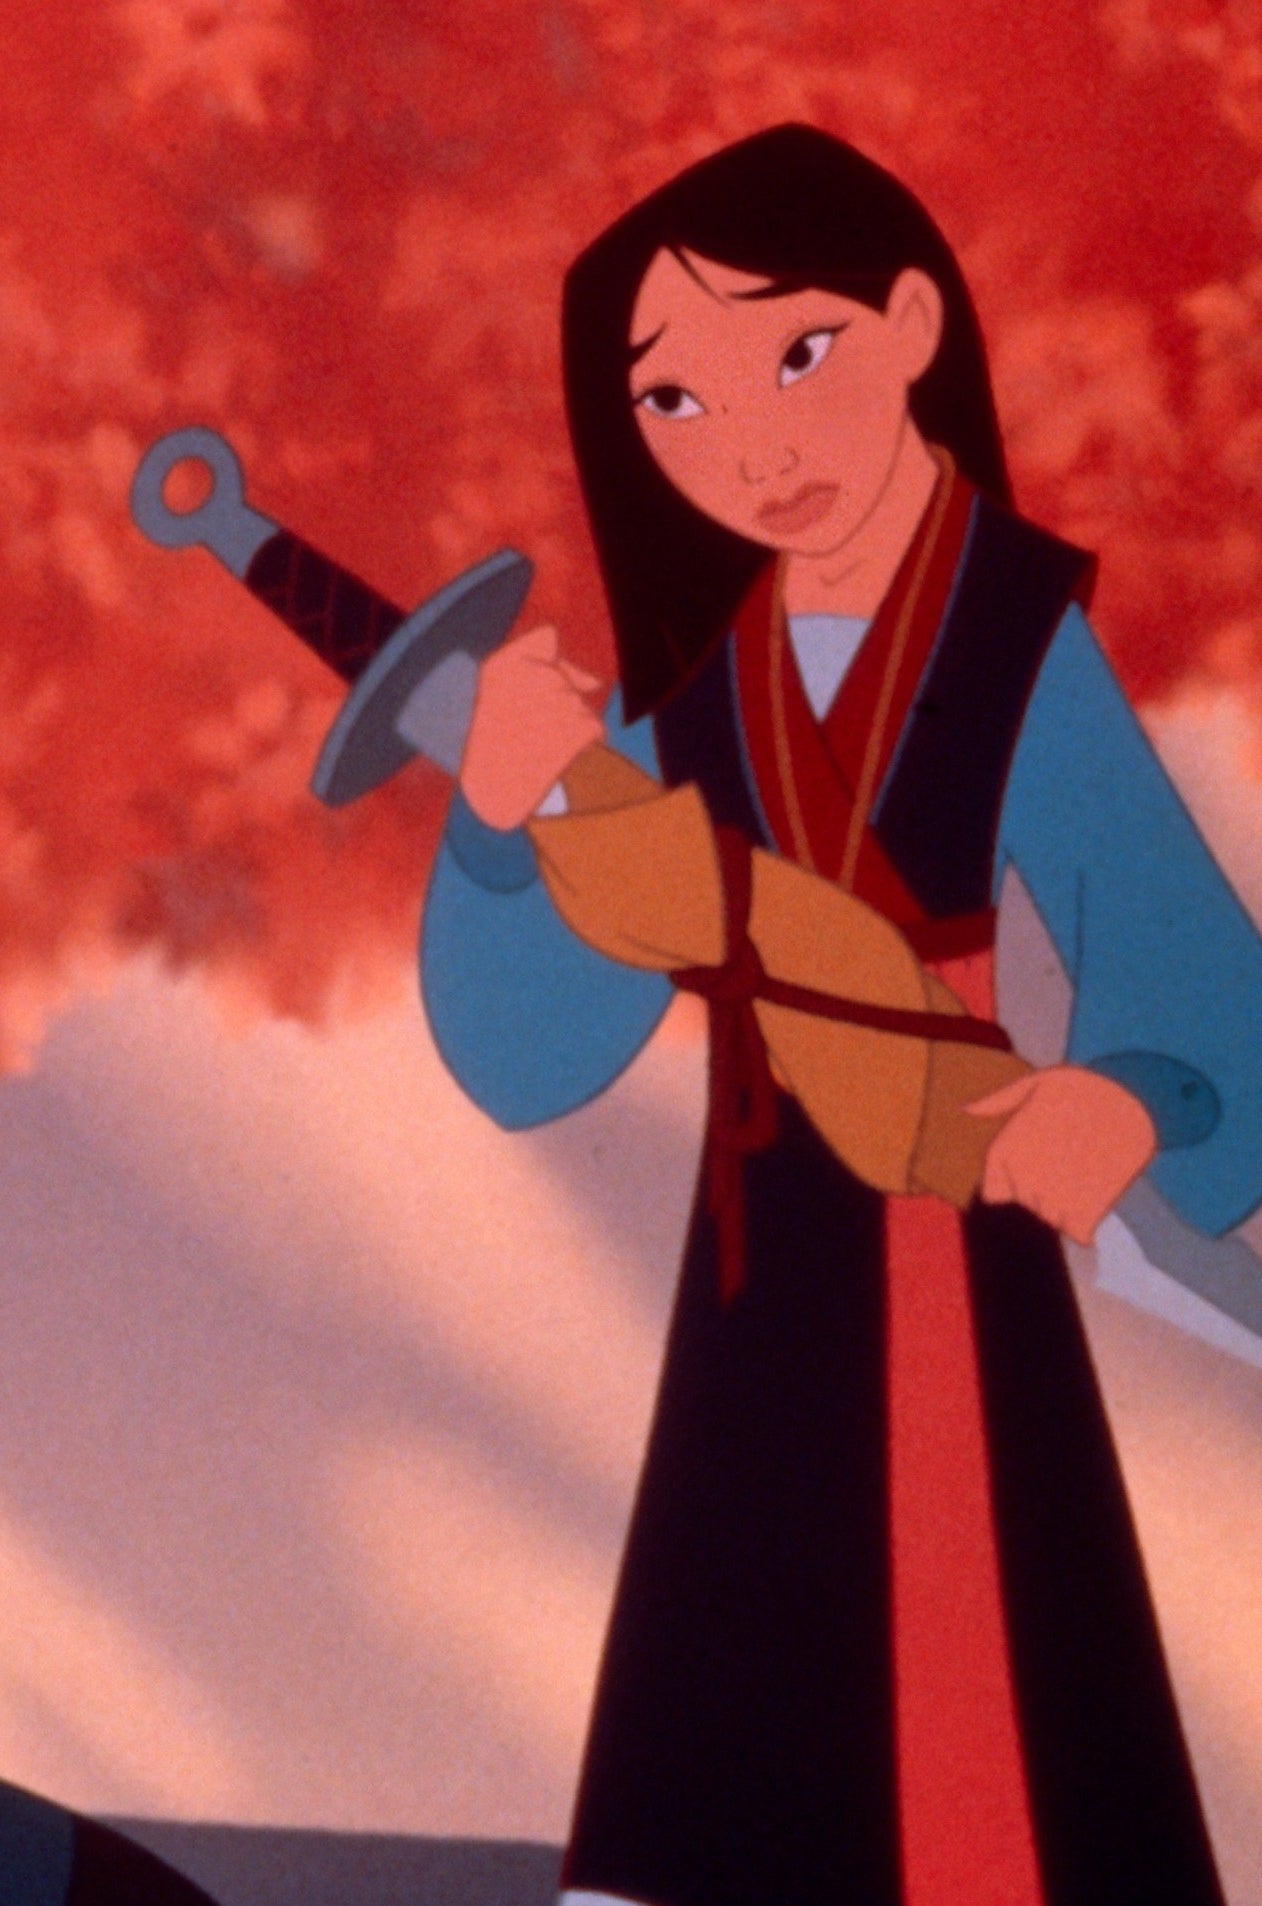 Mulan holding a wrapped up sword